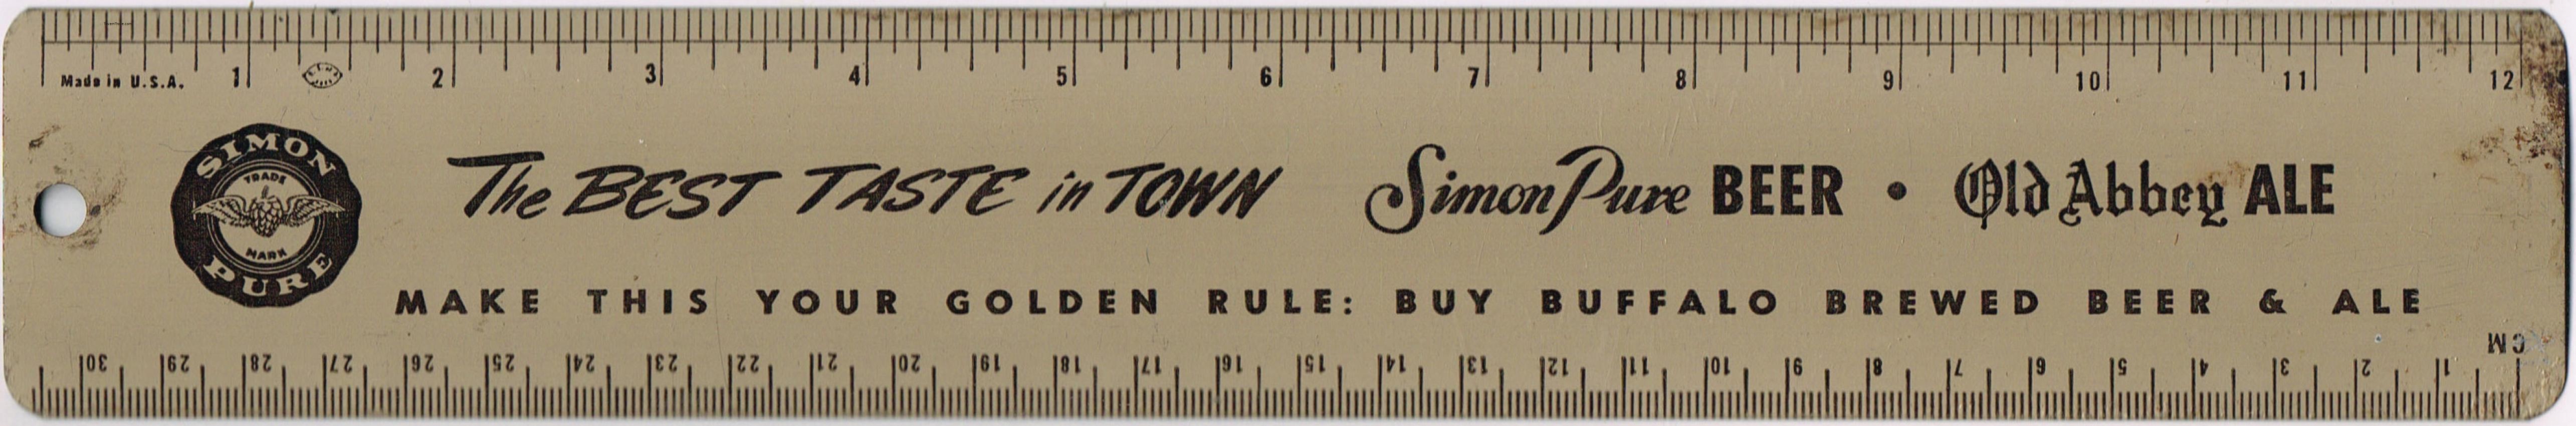 Simon Pure Beer/Old Abbey Ale Ruler